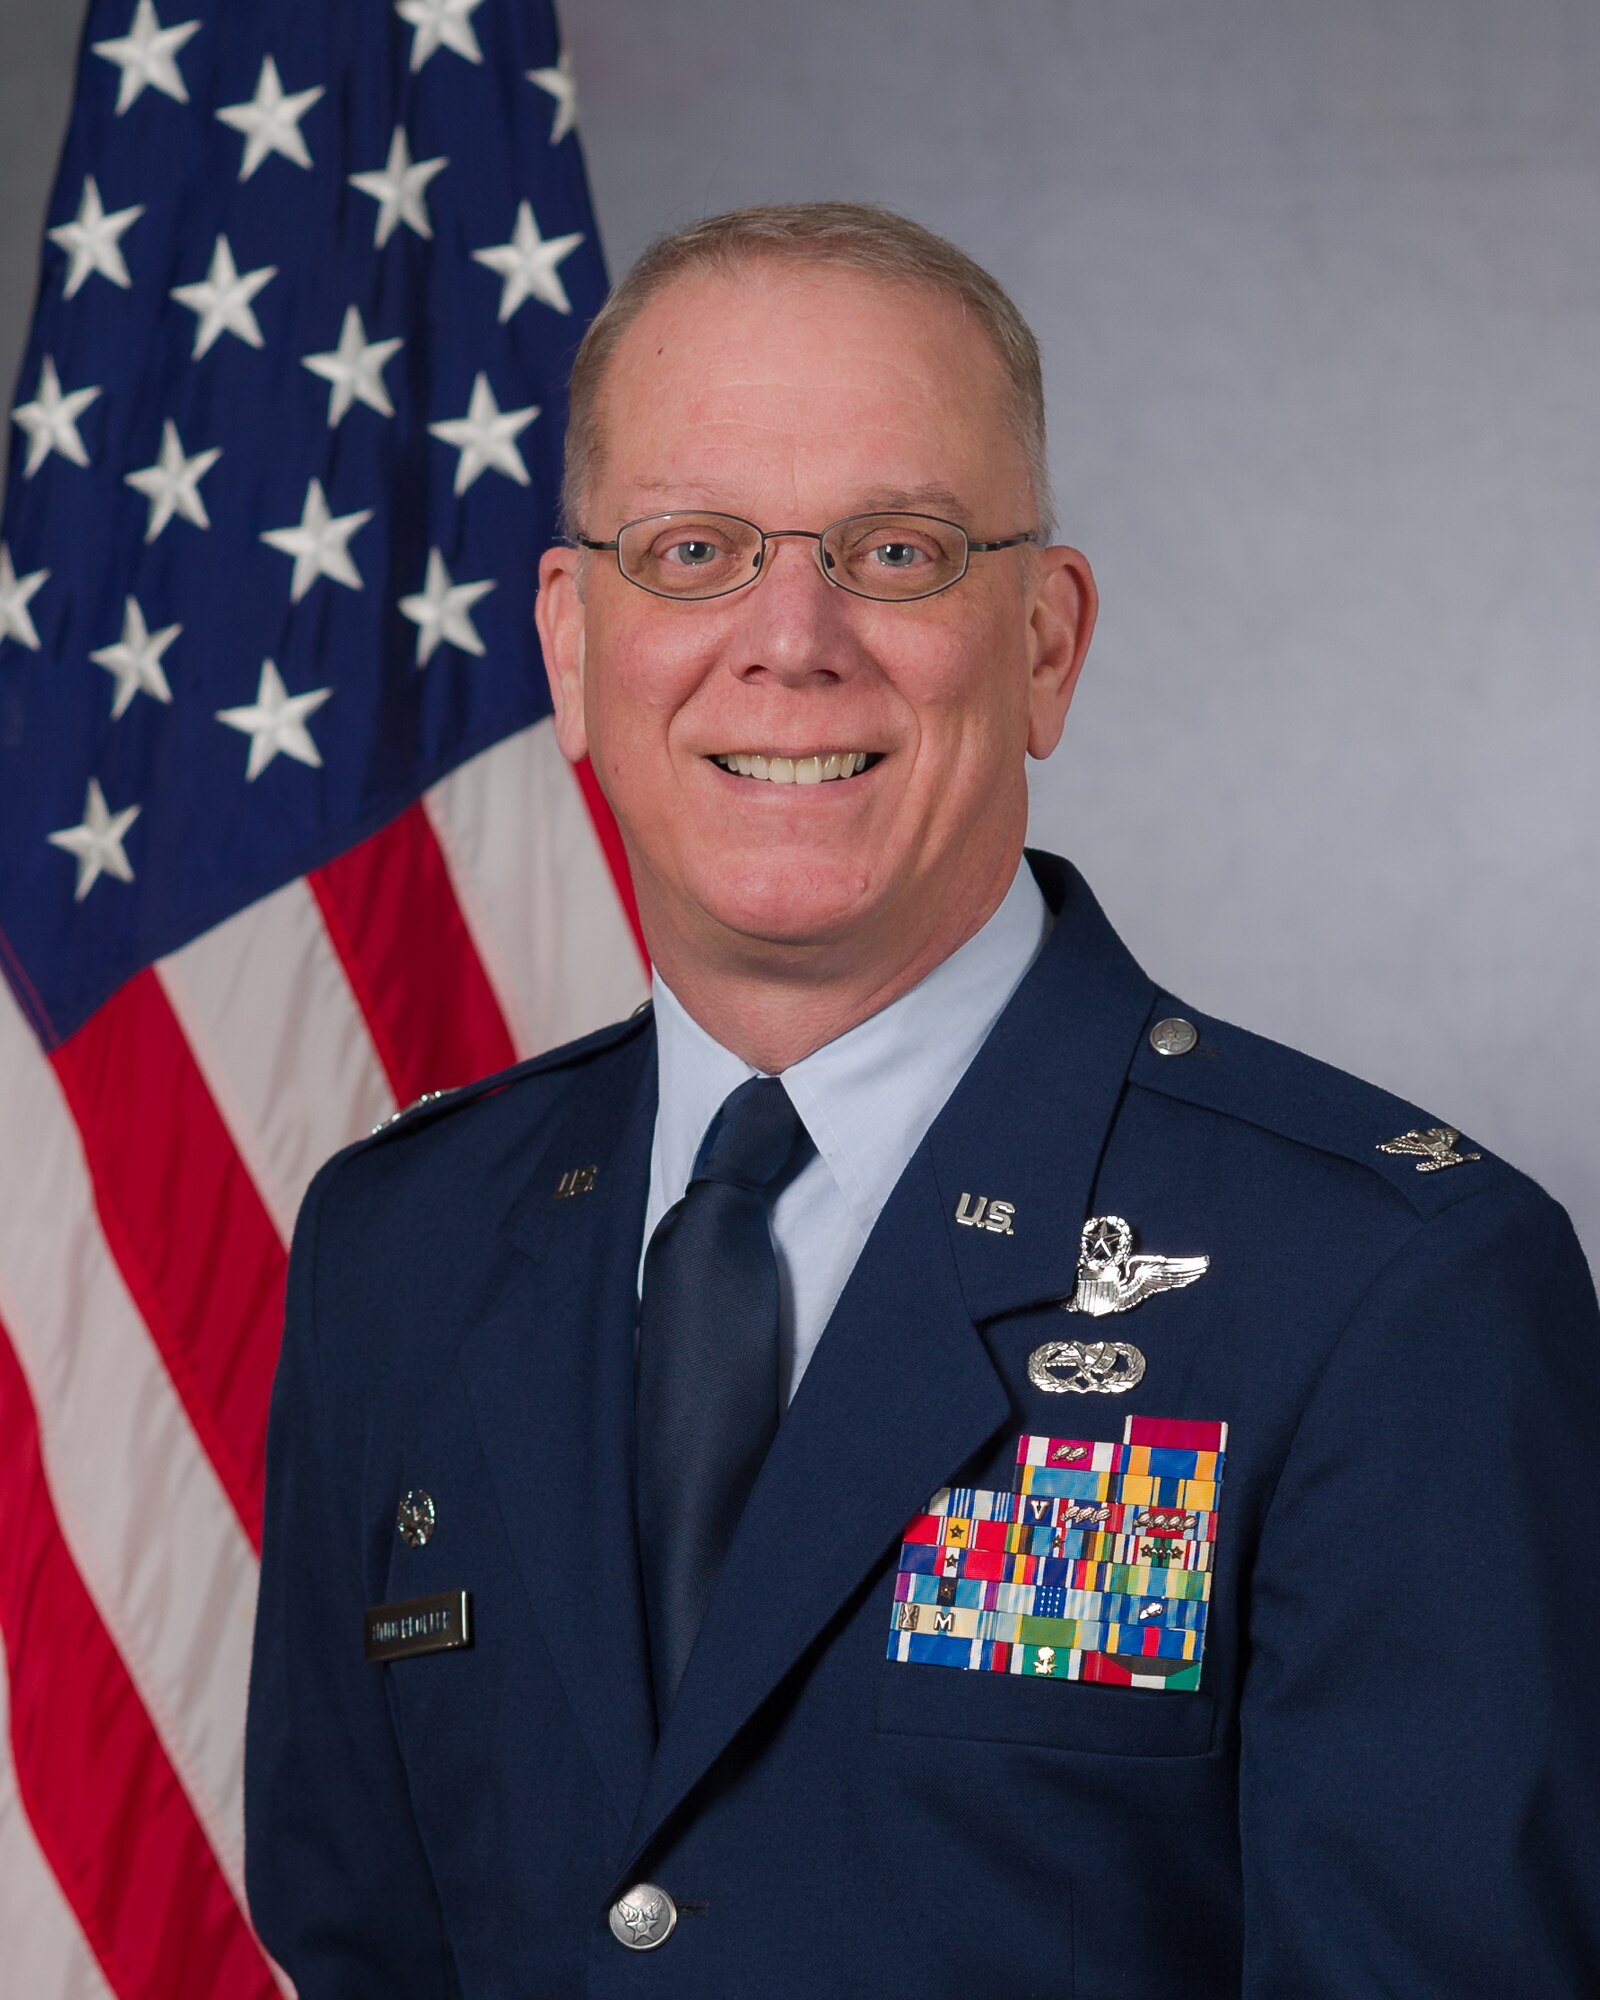 Colonel Michael J. Underkofler is the Chief of Staff for the Air Force Reserve Command's 22nd Air Force Dobbins ARB, GA assisting with the supervision of the Reserve's air mobility operations and other vital mission sets to include undergraduate pilot training, flight test operations and a highly mobile civil engineering response force.